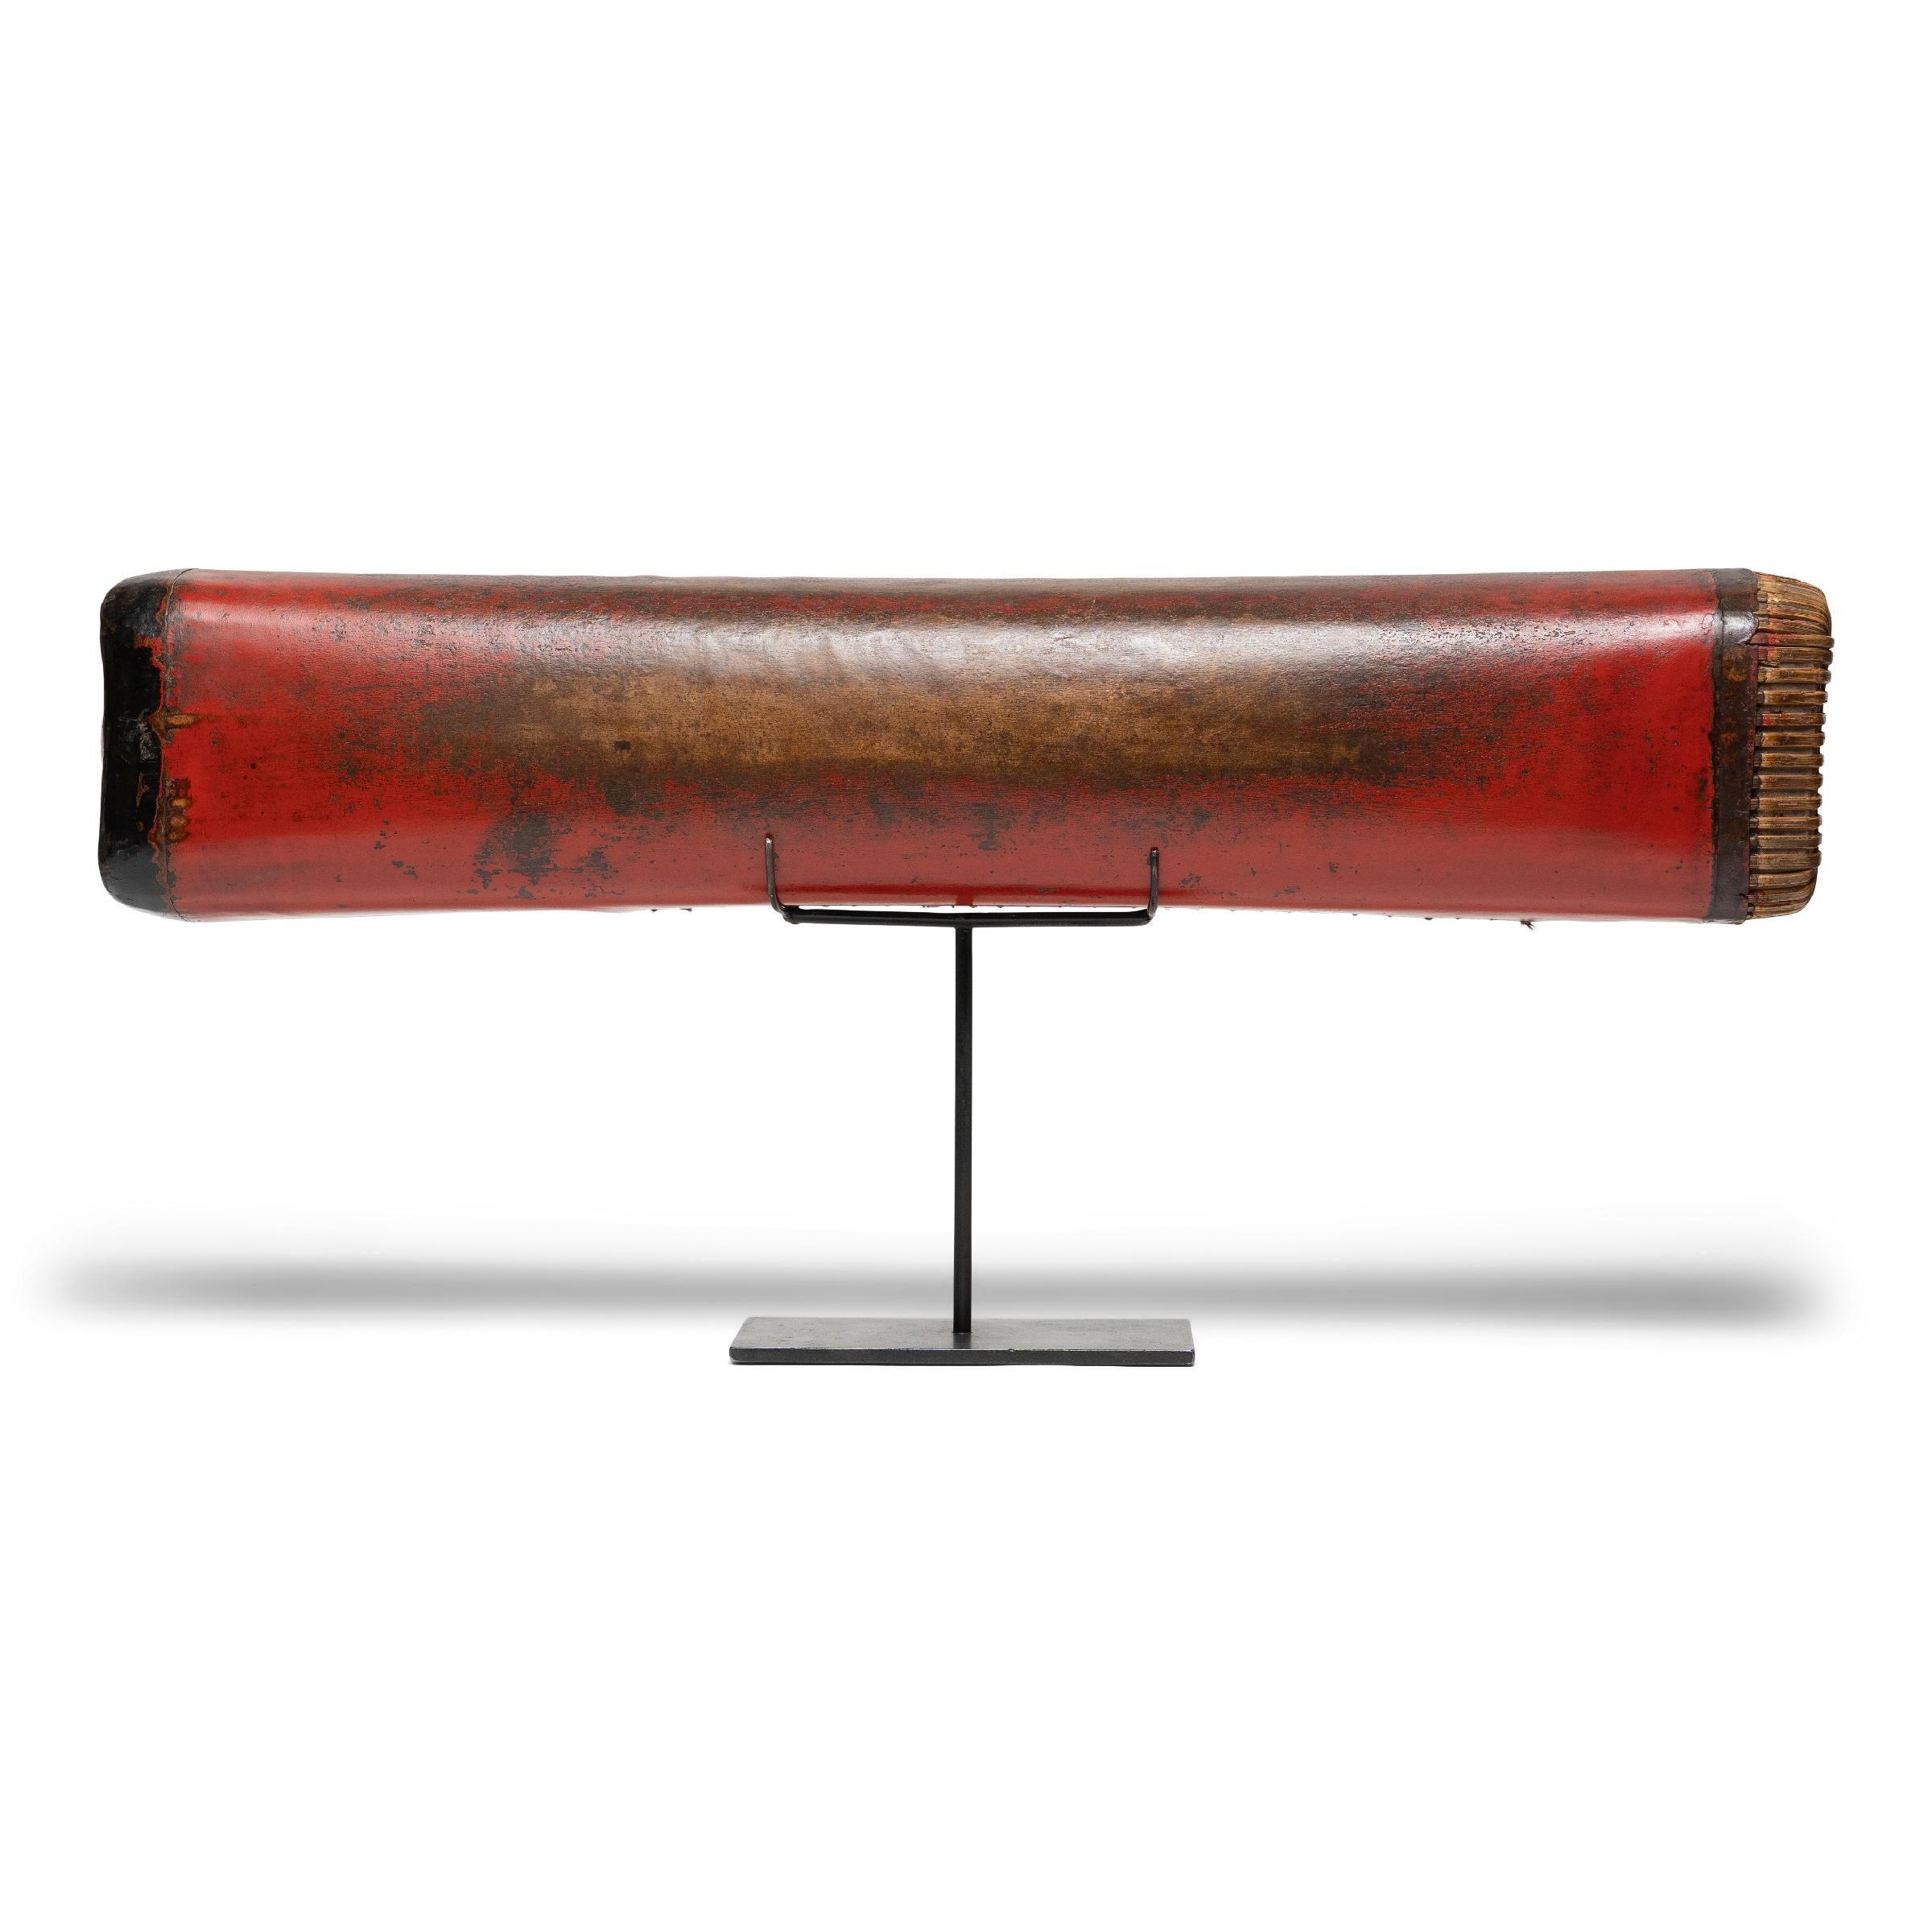 This extraordinary Chinese headrest from the late Qing dynasty is hand-crafted of lacquered hide atop an elongated bamboo frame. Used while sleeping like a modern pillow, the headrest has a pliable design that enabled contour comfort - quite